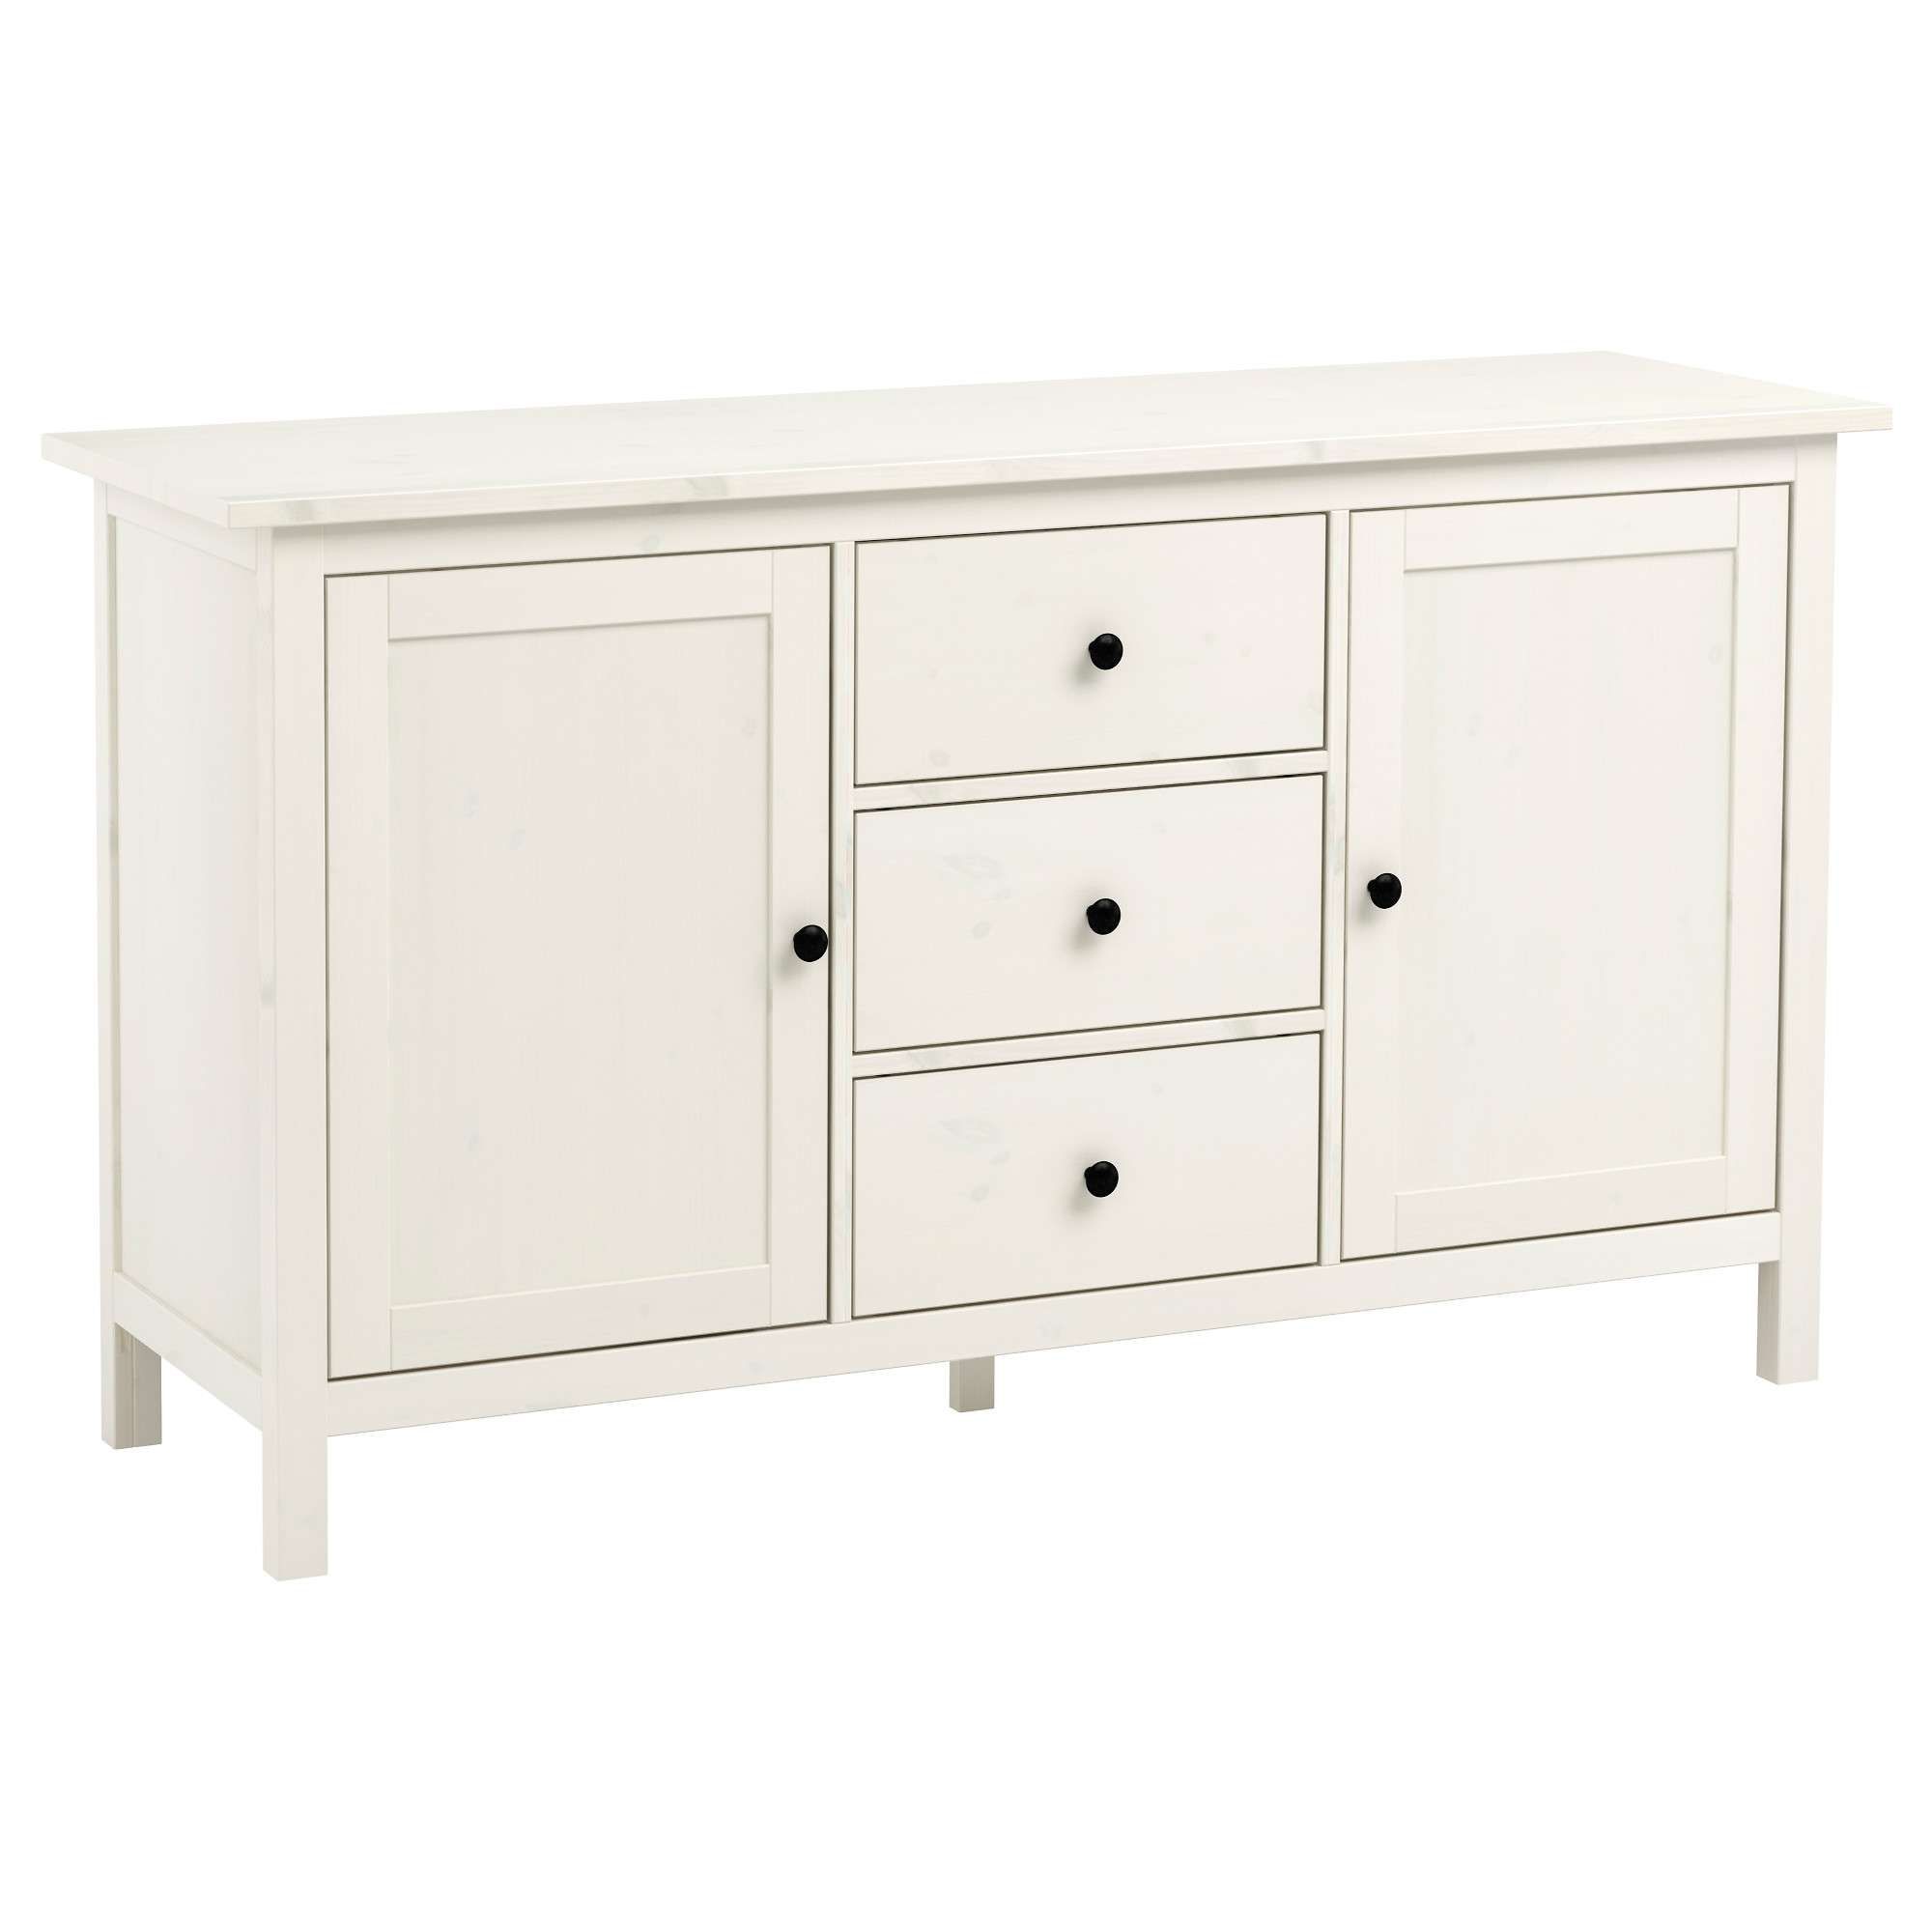 Hemnes Sideboard – White Stain – Ikea Throughout Ikea Sideboards (View 4 of 20)